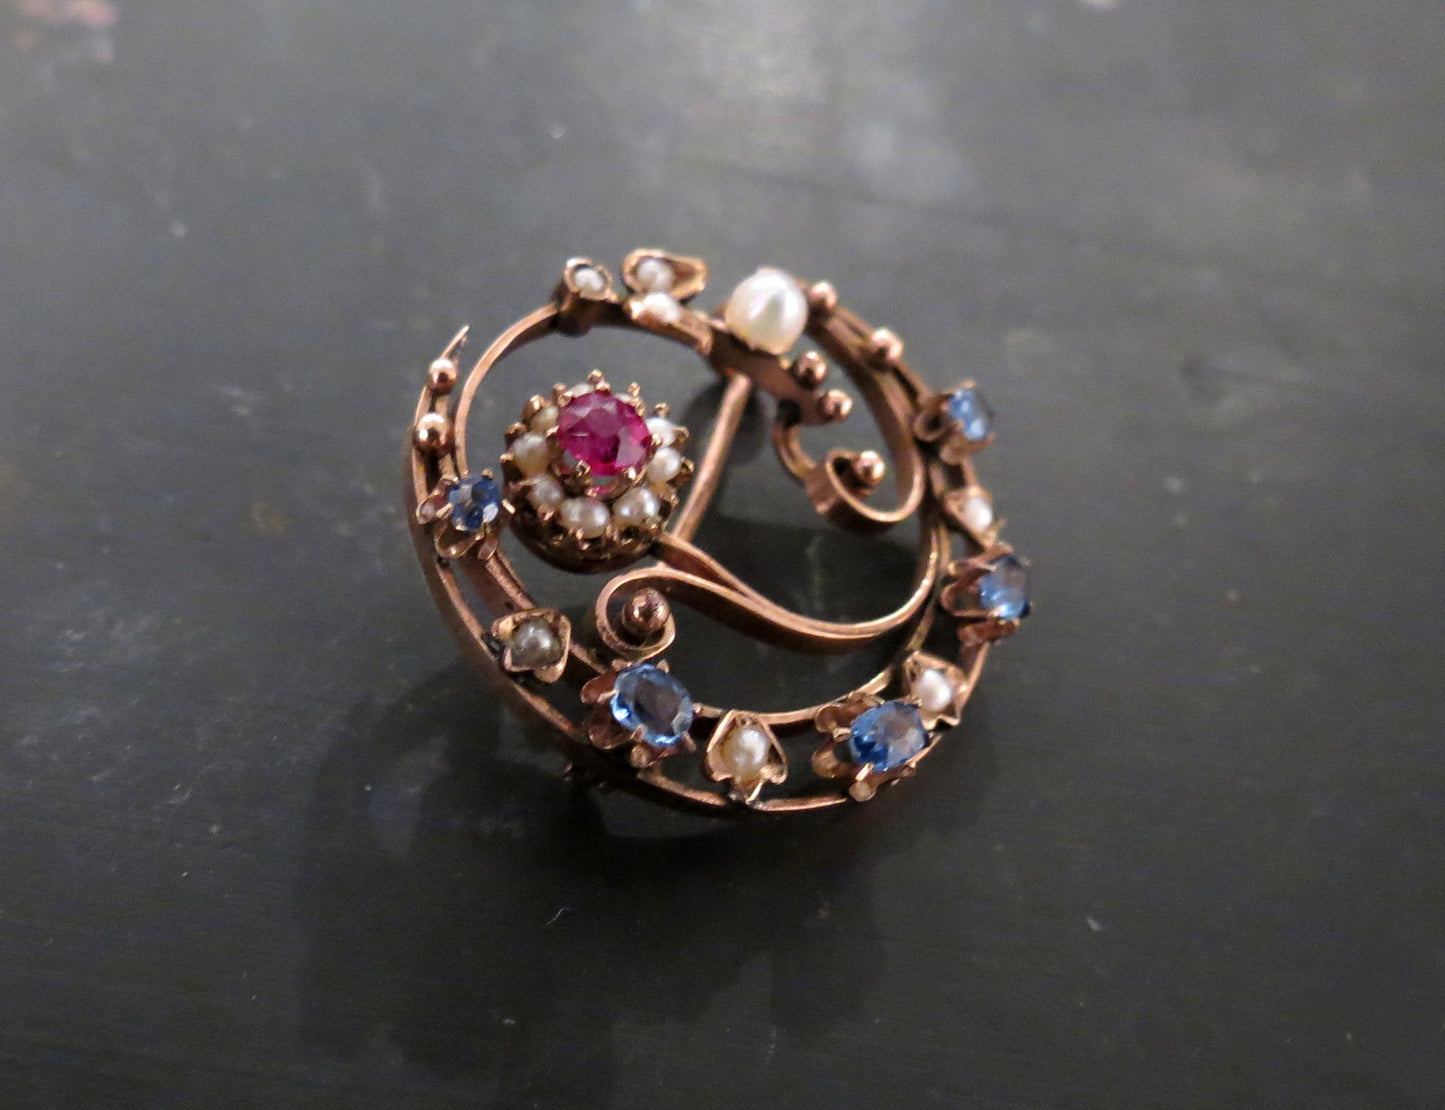 SOLD--Art Nouveau Ruby, Sapphire and Pearl Honeymoon Brooch 10k c. 1900